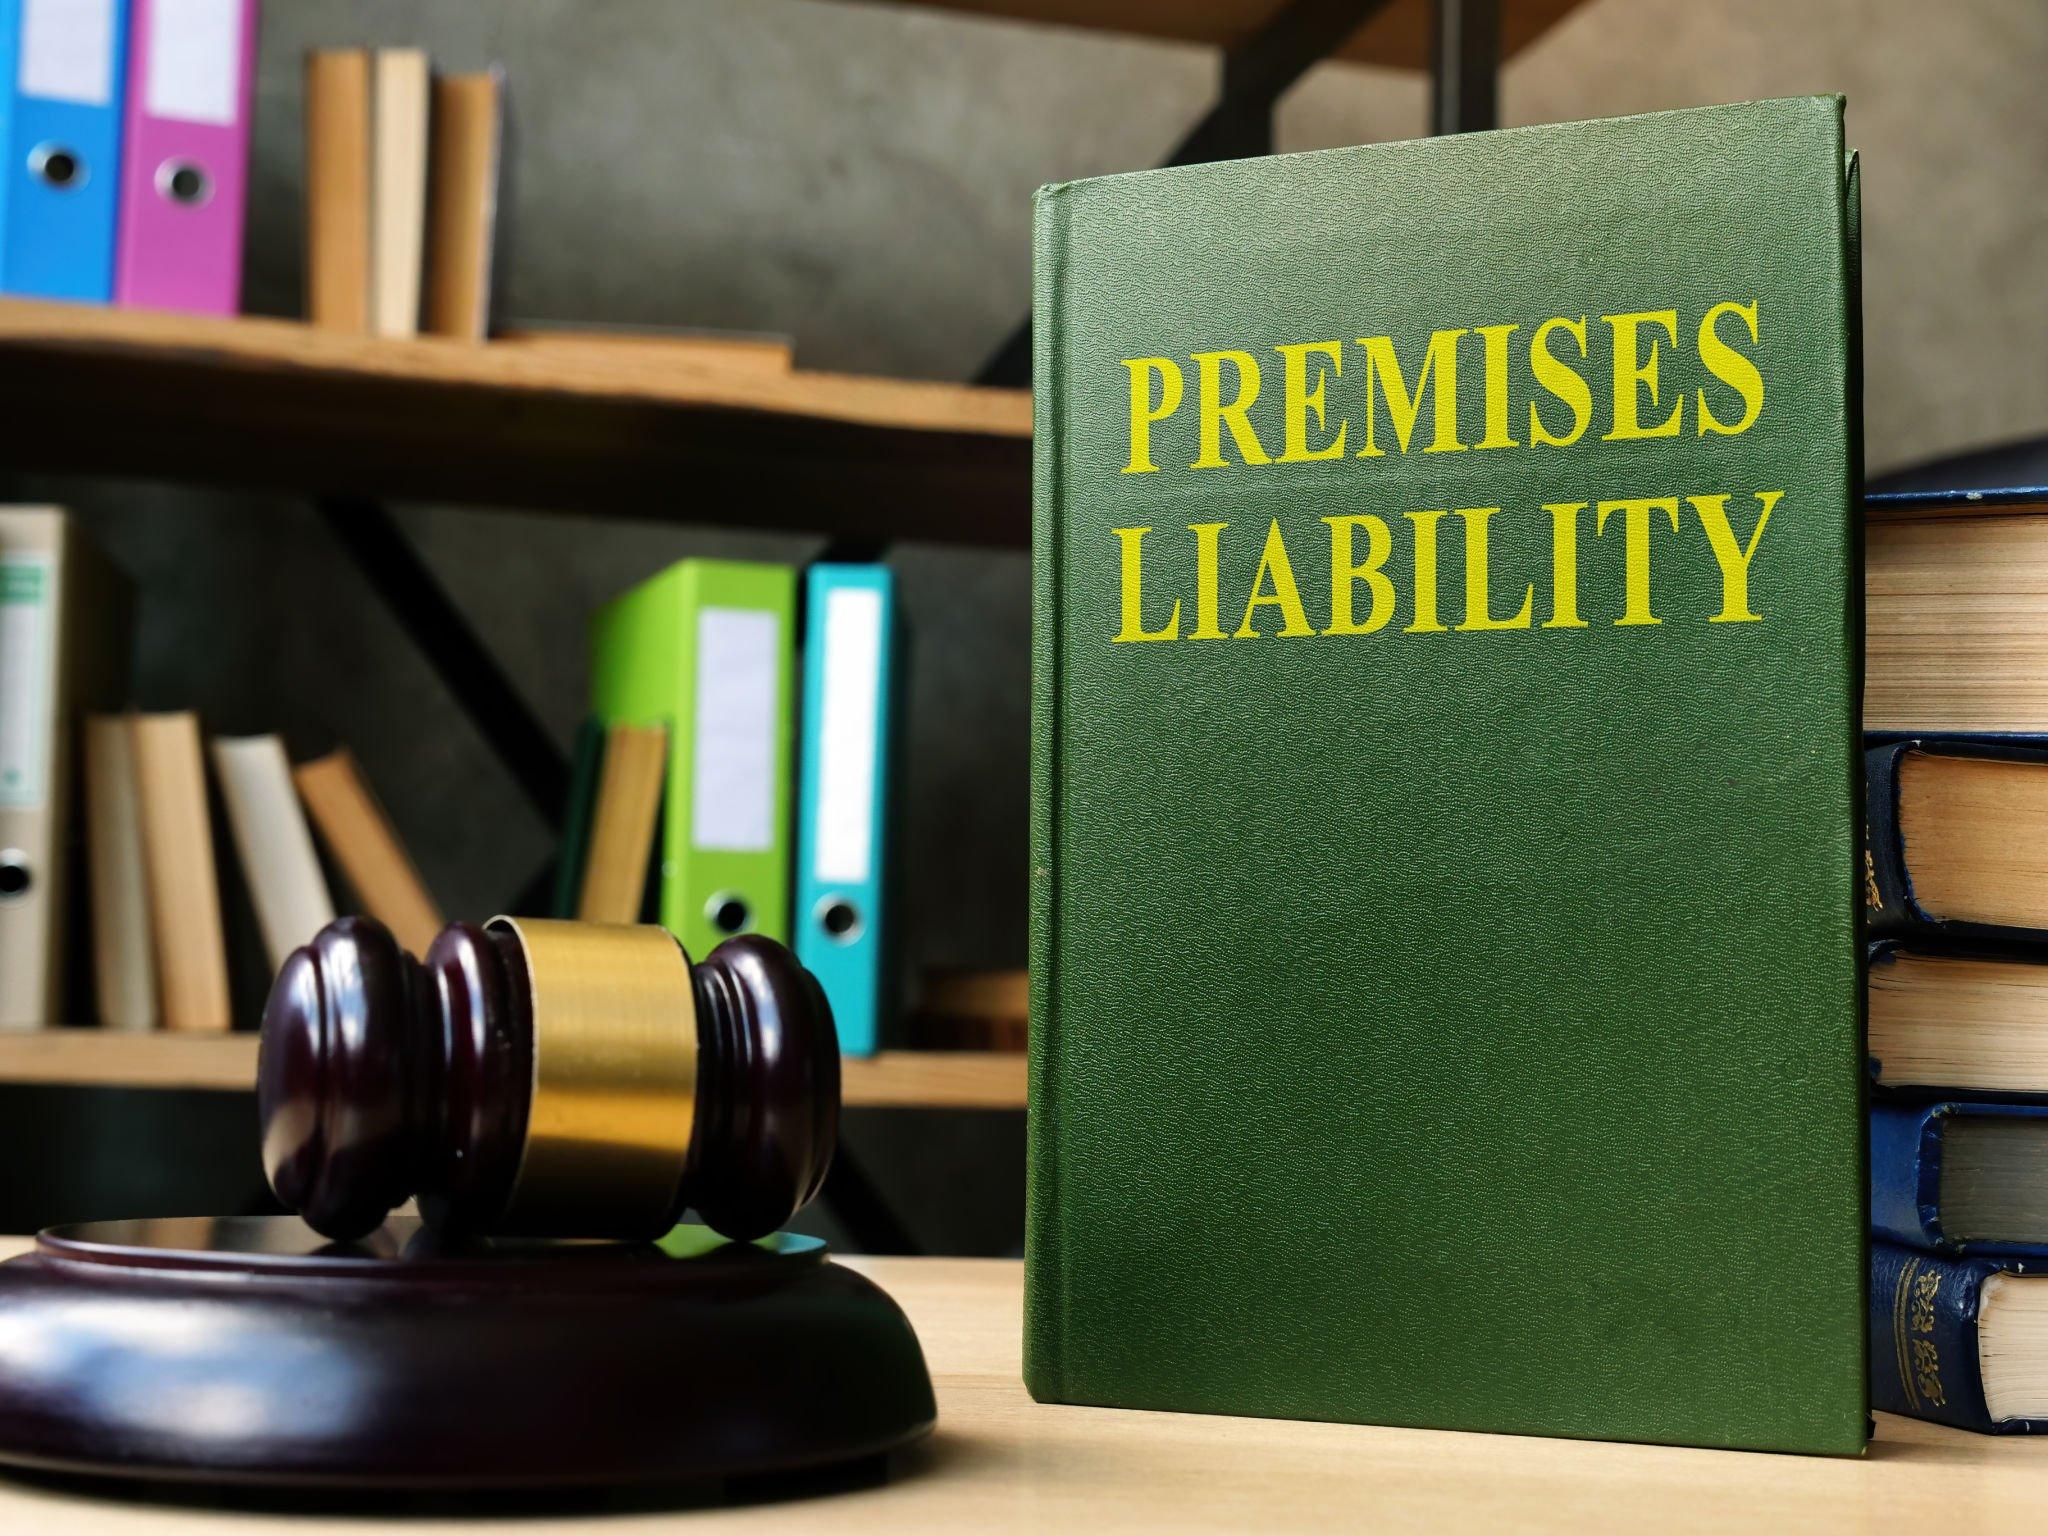 Do You Know What Premises Liability is?